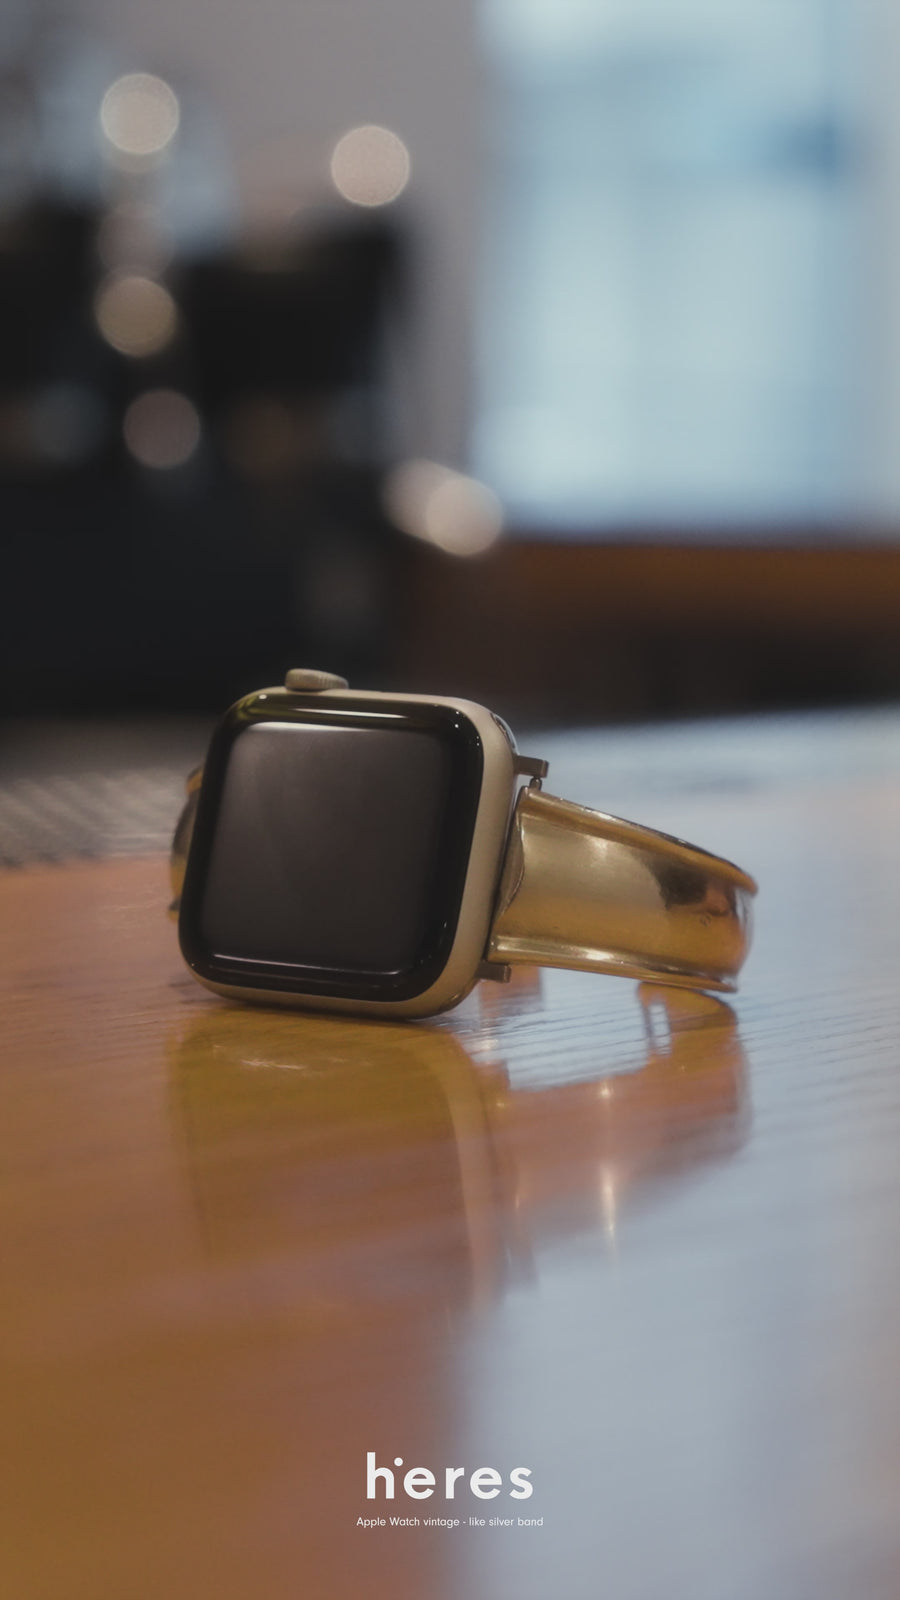 Apple Watch vintage - like silver band